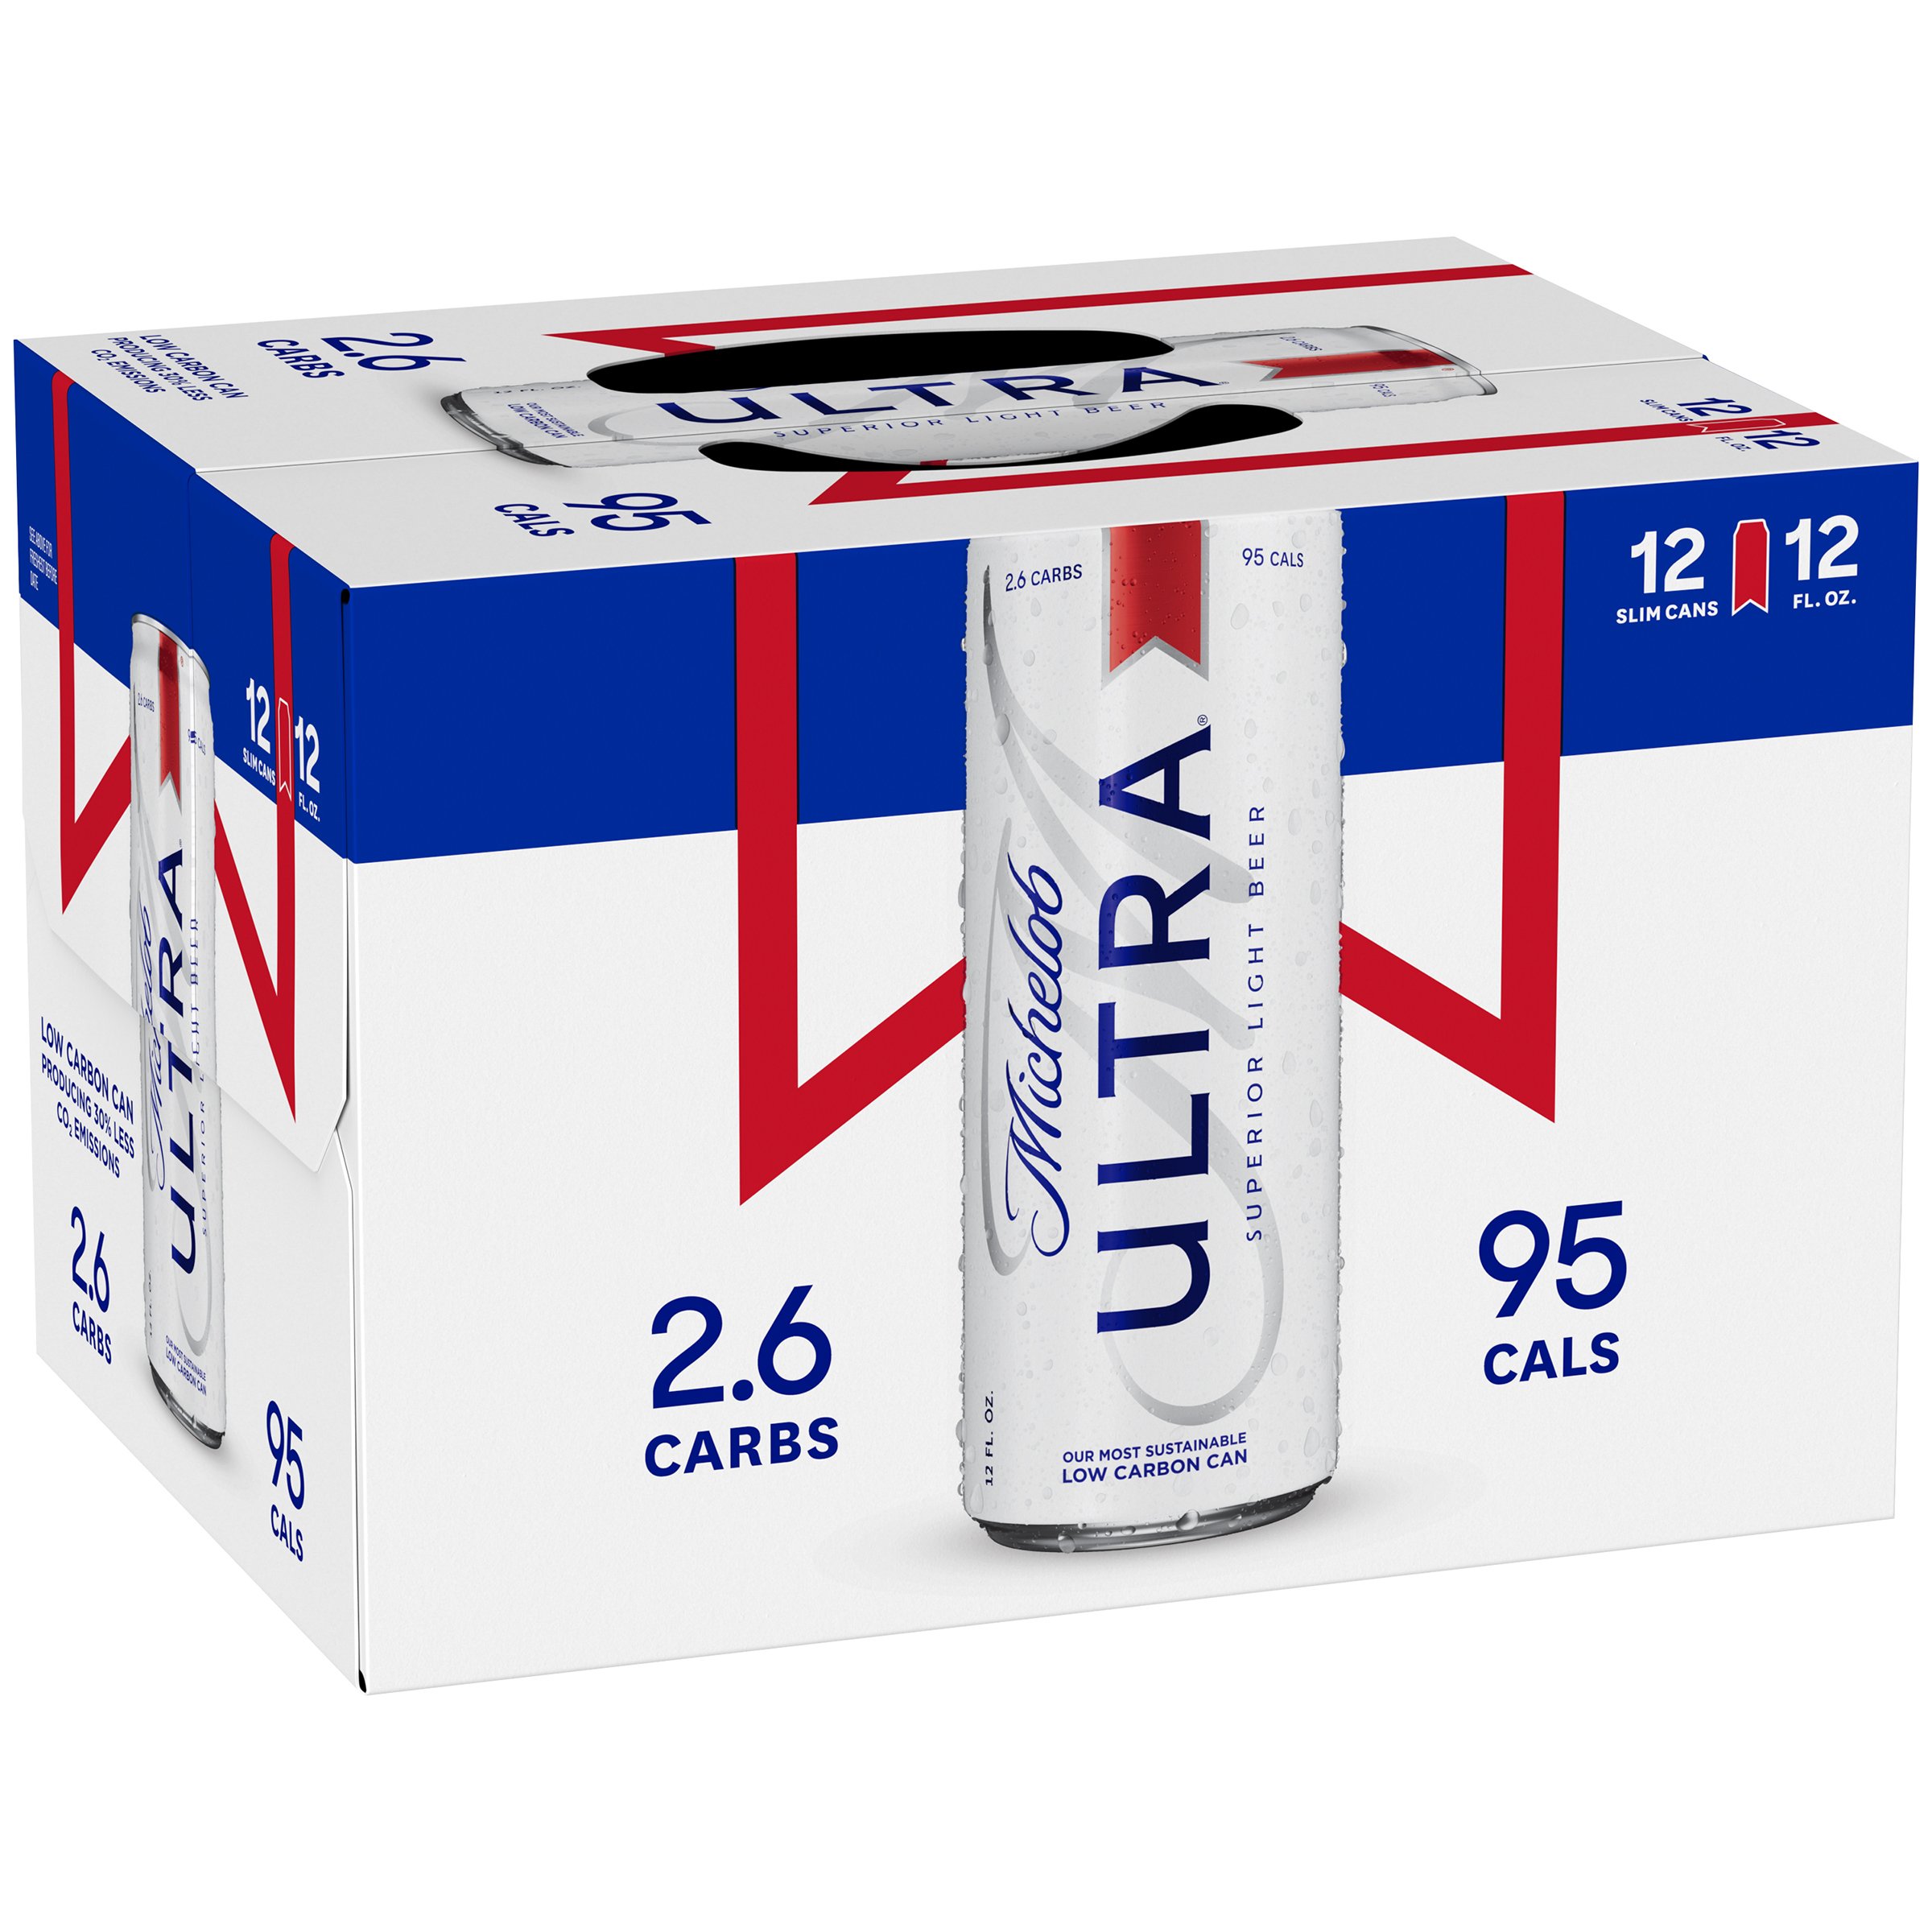 Michelob Ultra Nutrition Facts  